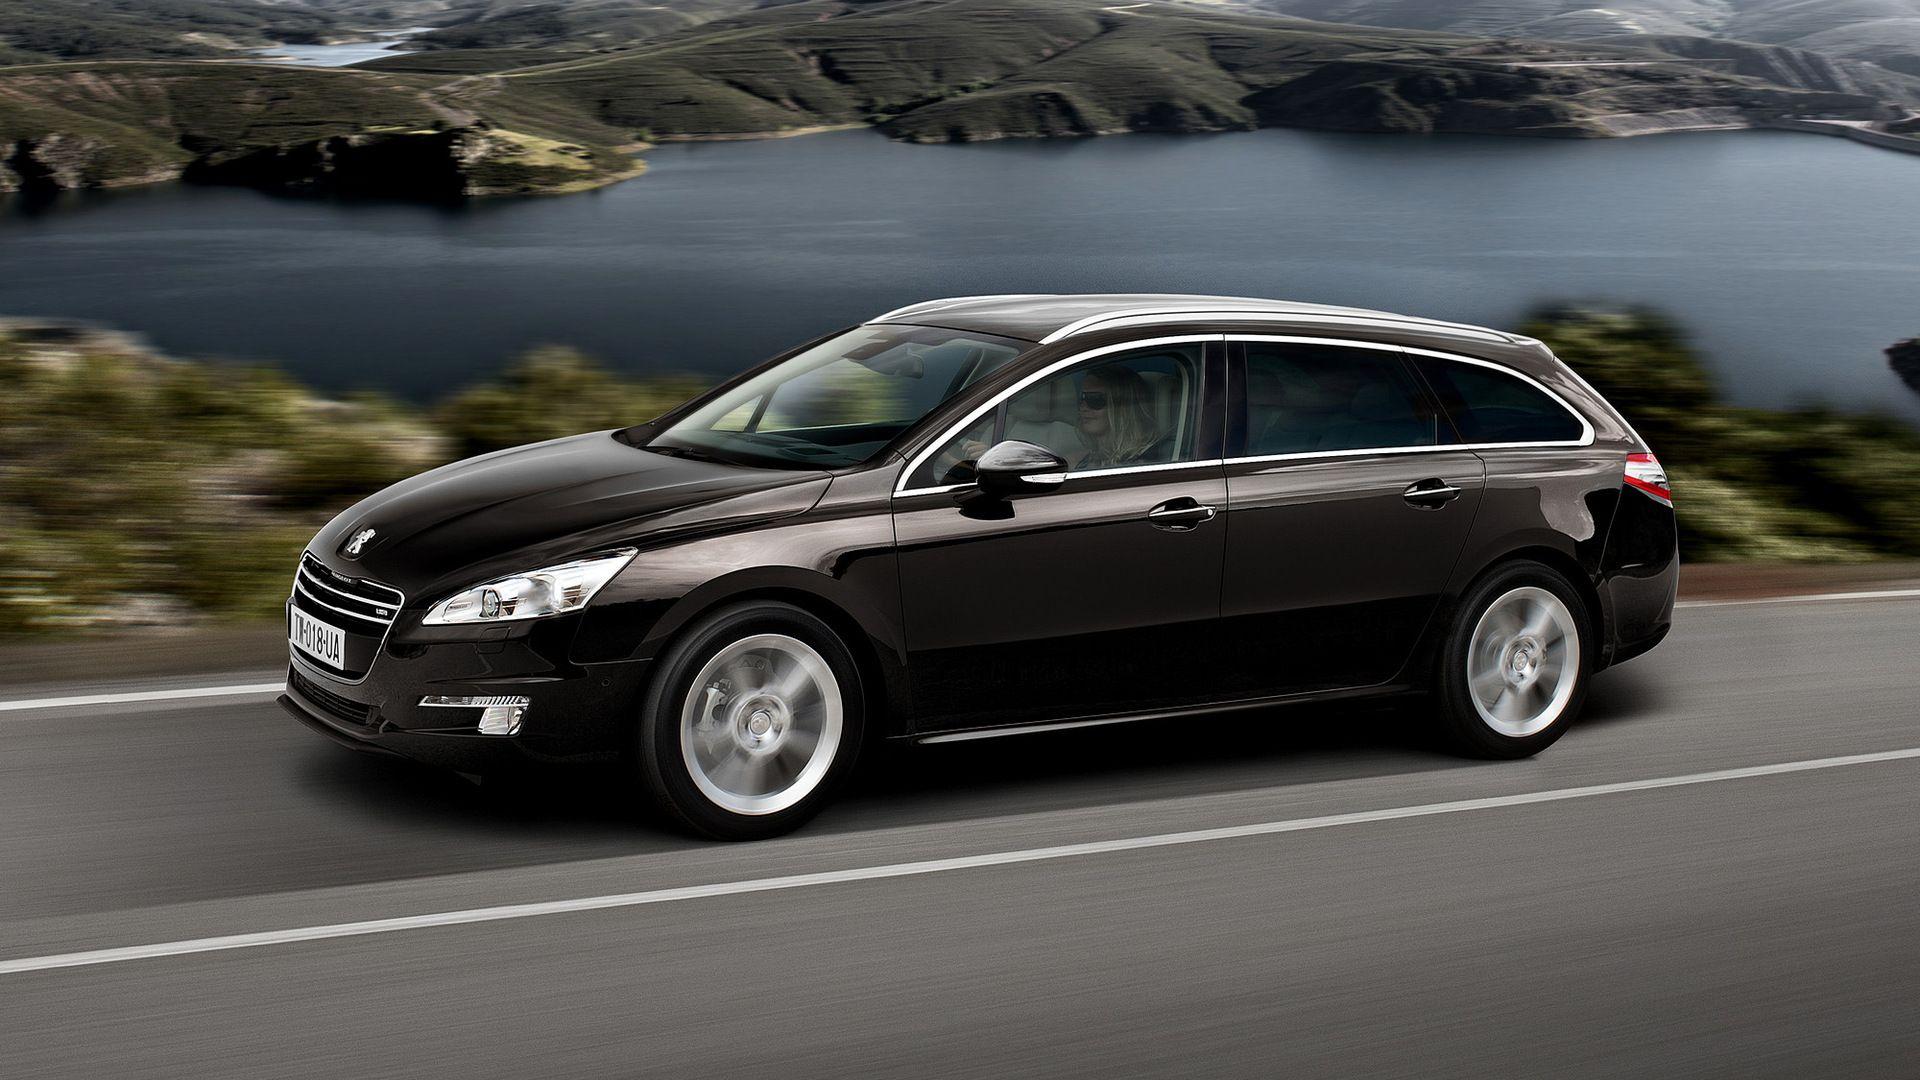 Peugeot 508 SW (2010) Wallpaper and HD Image